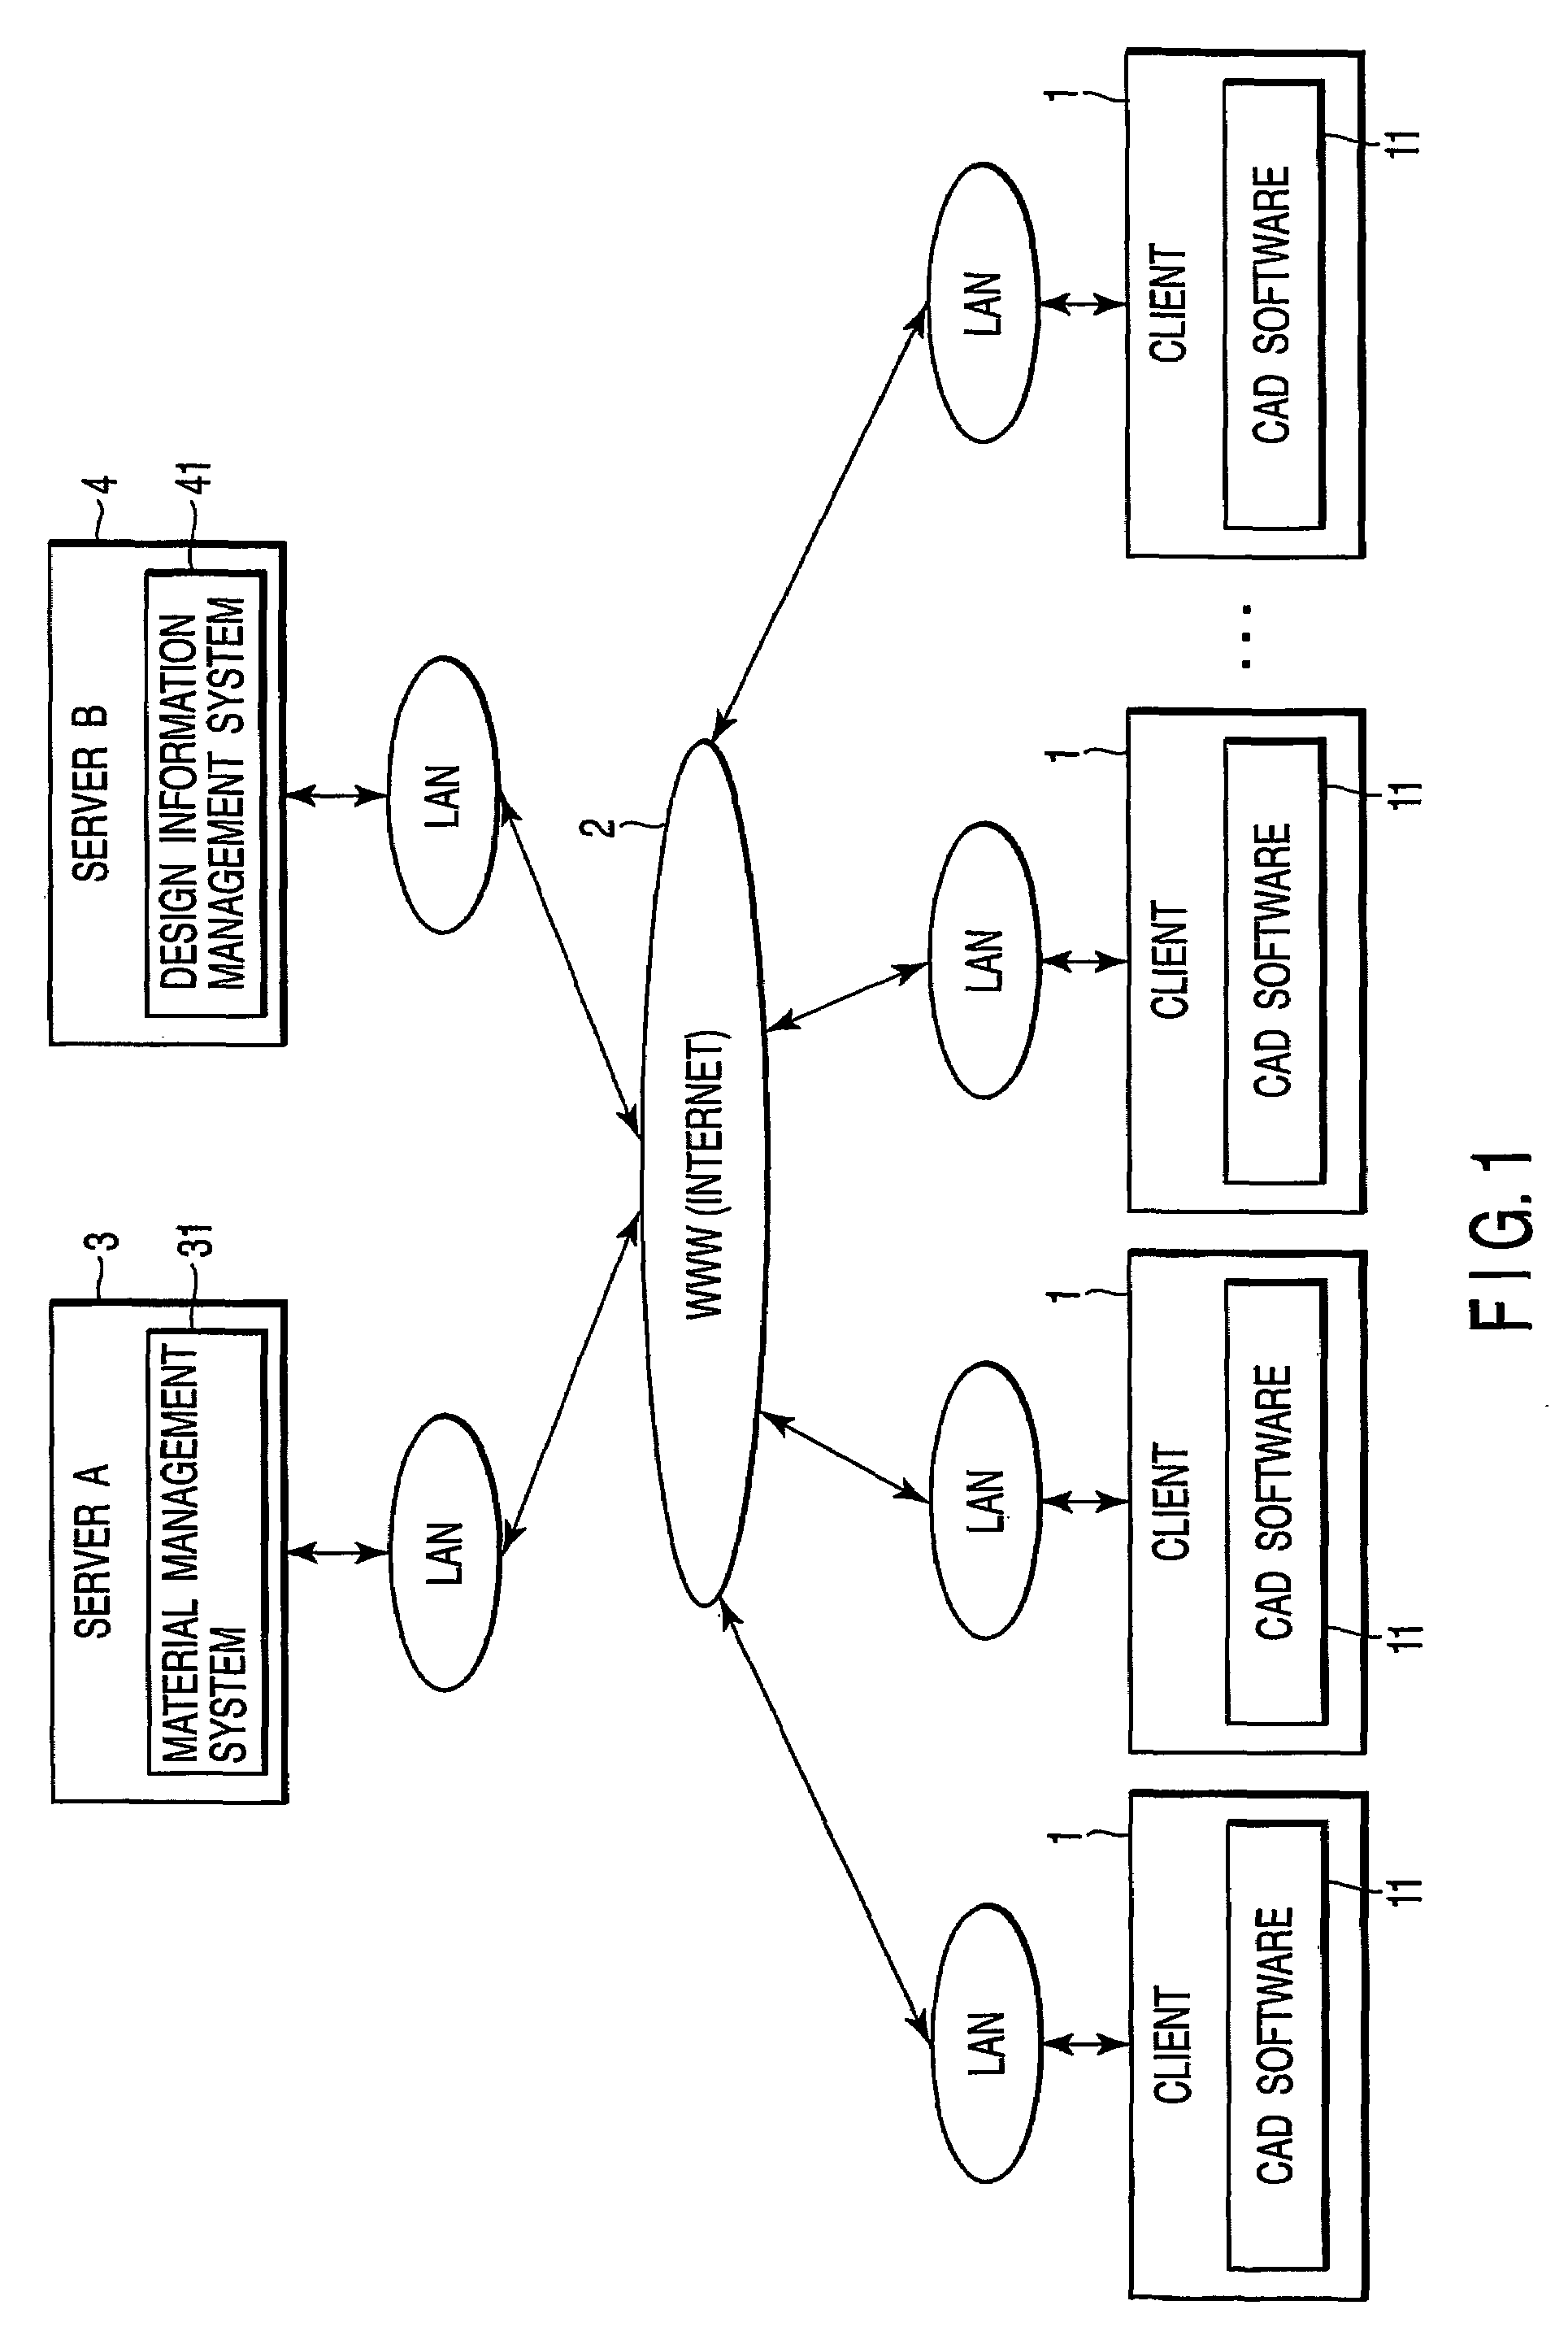 Design supporting system for supporting component design